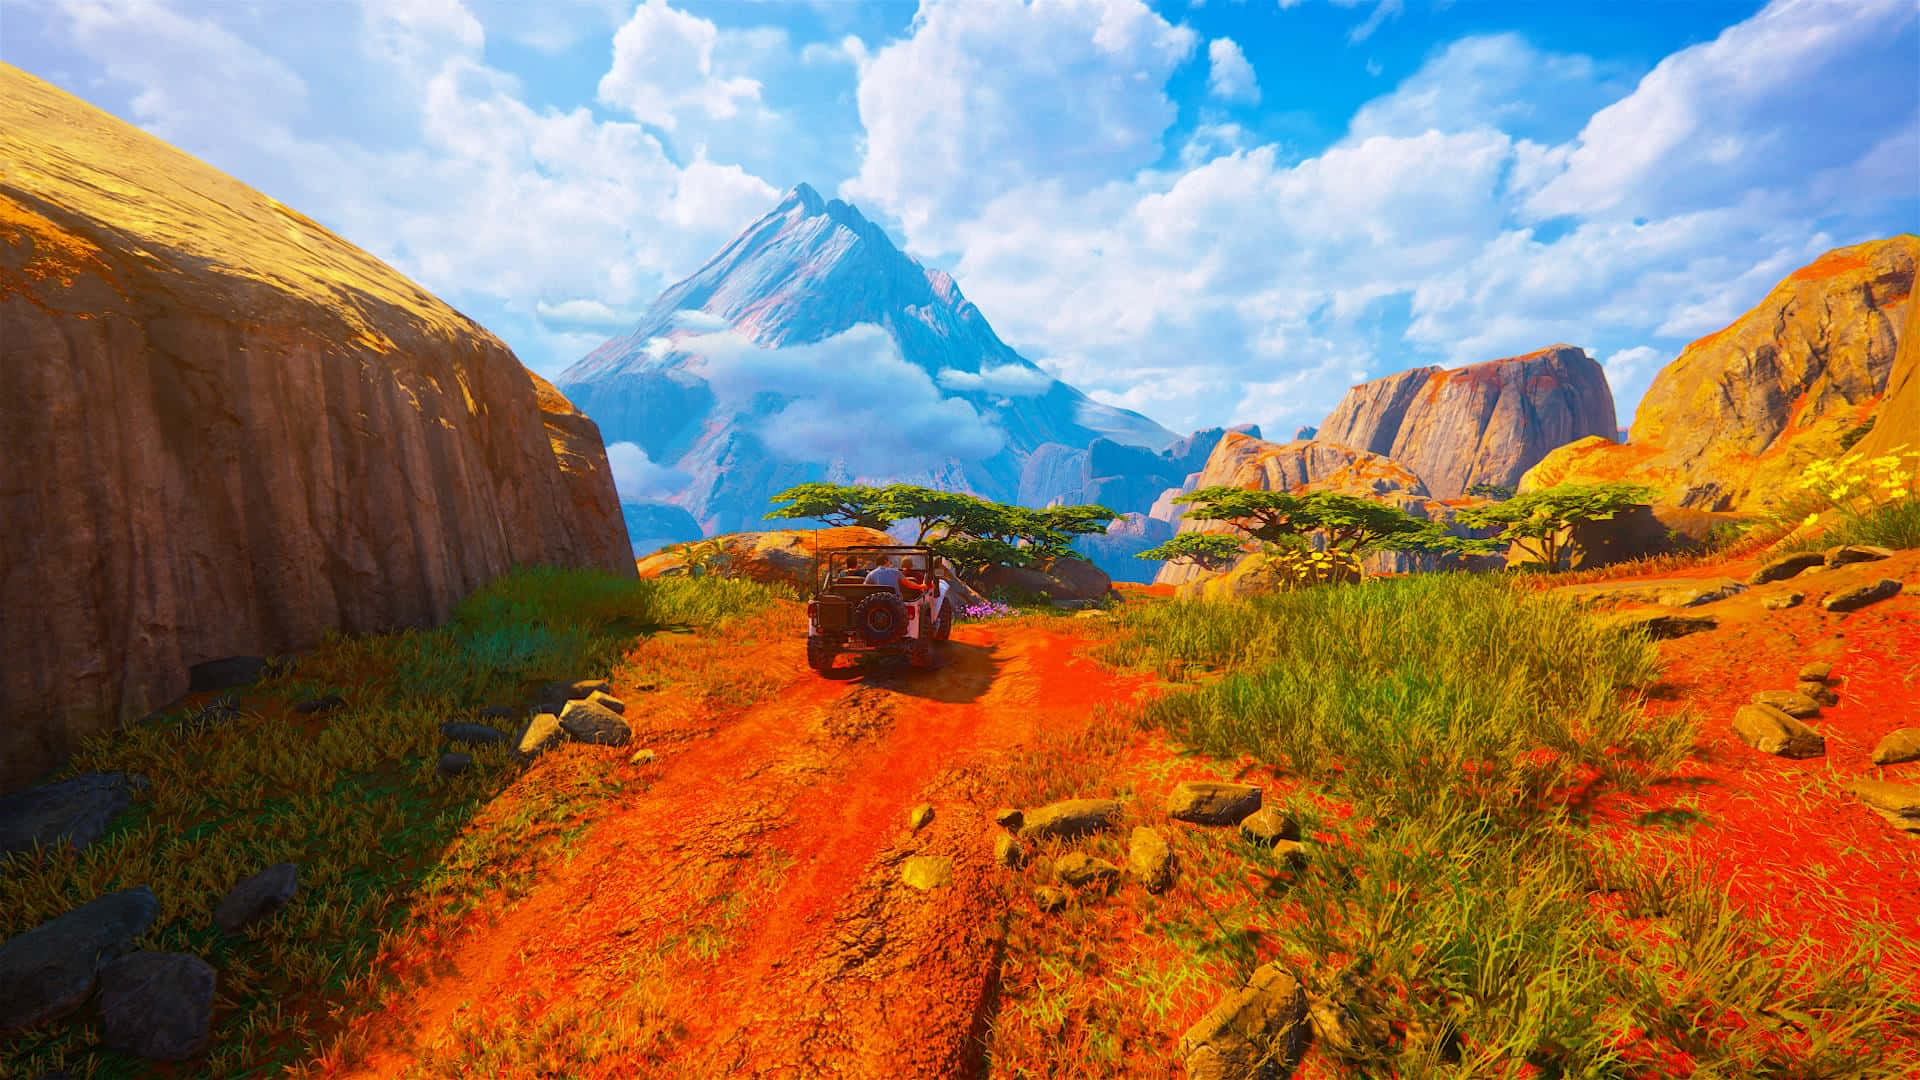 A Screenshot Of A Desert With Mountains And A Red Car Wallpaper